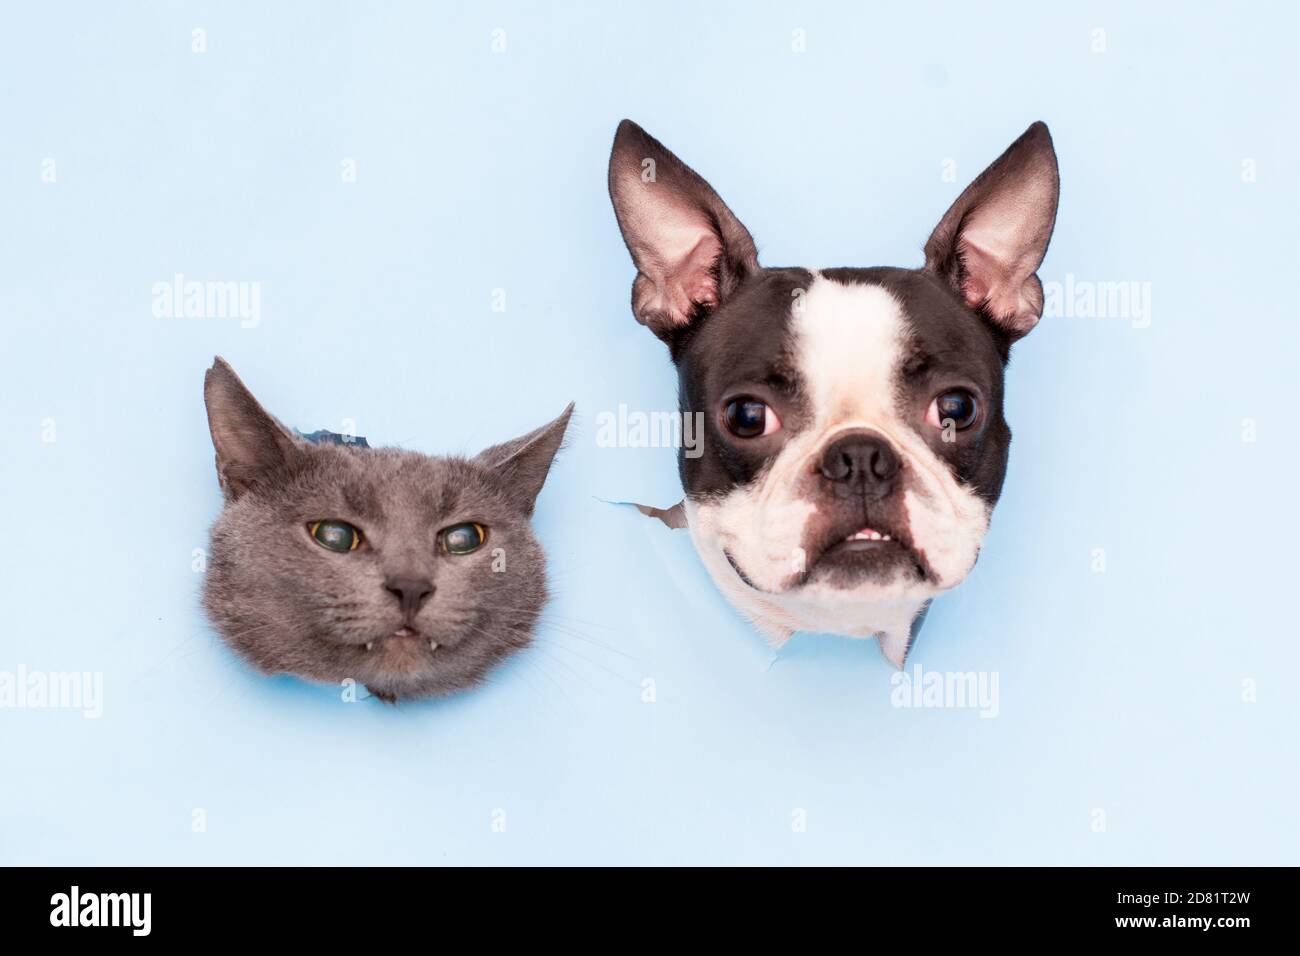 The heads of a gray cat and a Boston Terrier dog peek through holes in the blue paper. Funny creative.  Stock Photo